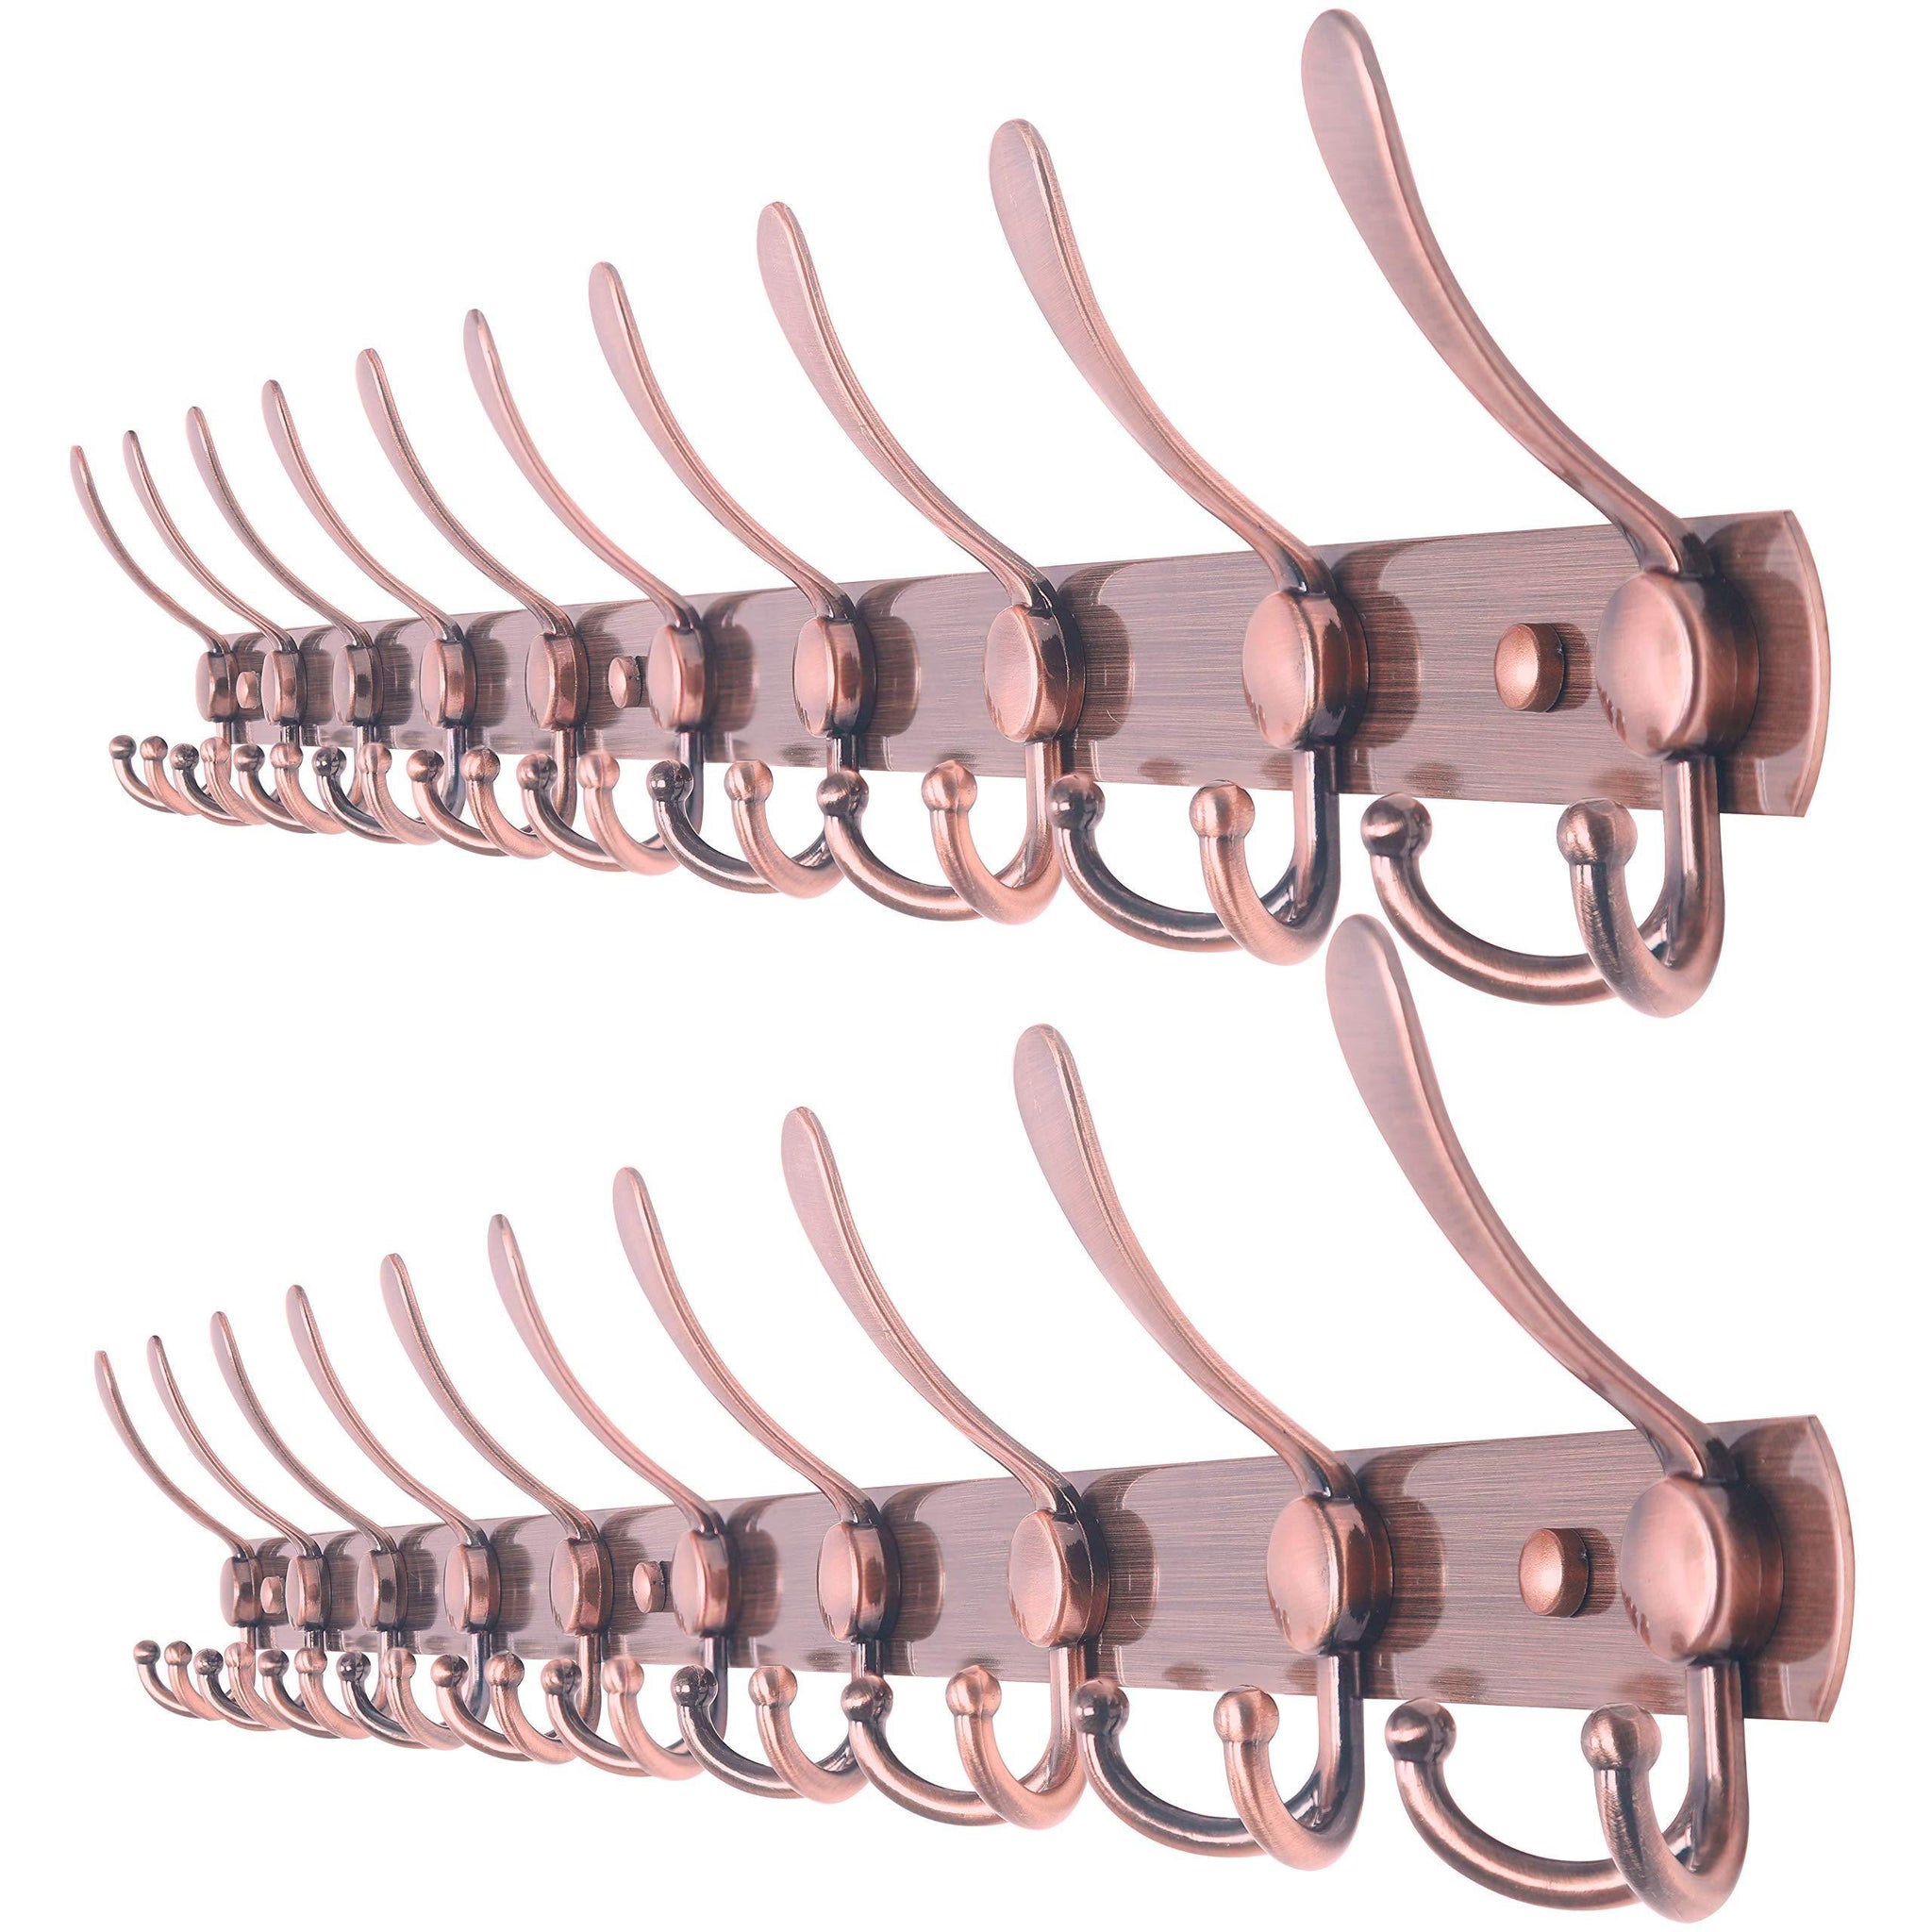 Products webi coat rack wall mounted 16 hole to hole center10 tri hook for hanging coats metal coat hook rack rail wall coat rack with hooks coat hanger wall mount for entryway jacket antique copper 2 pcs